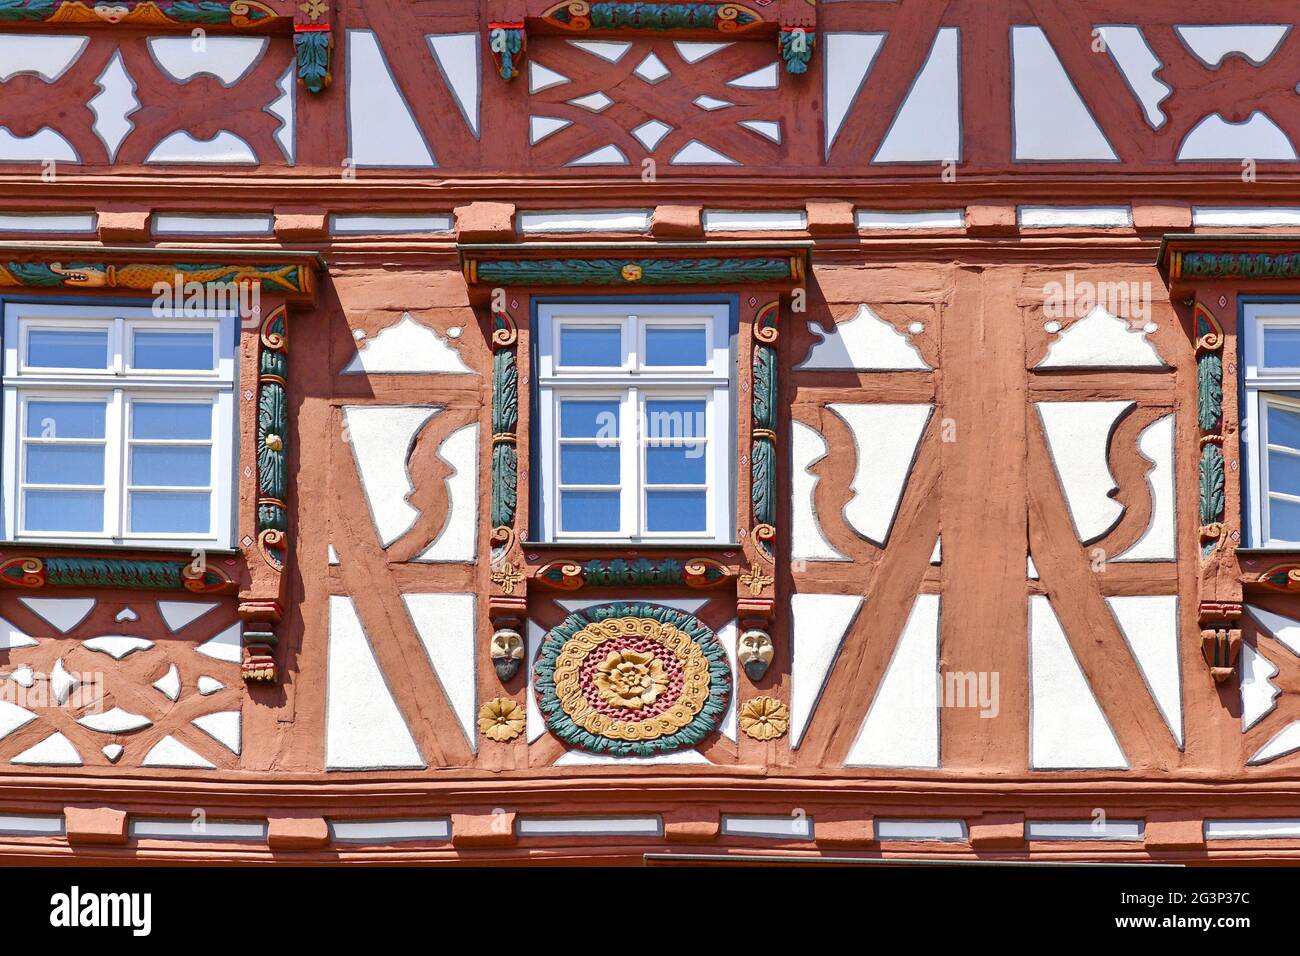 Mosbach, Germany - June 2021: Part of facade of old historic timber framing building called 'Palmsche Haus' built in 1610 Stock Photo